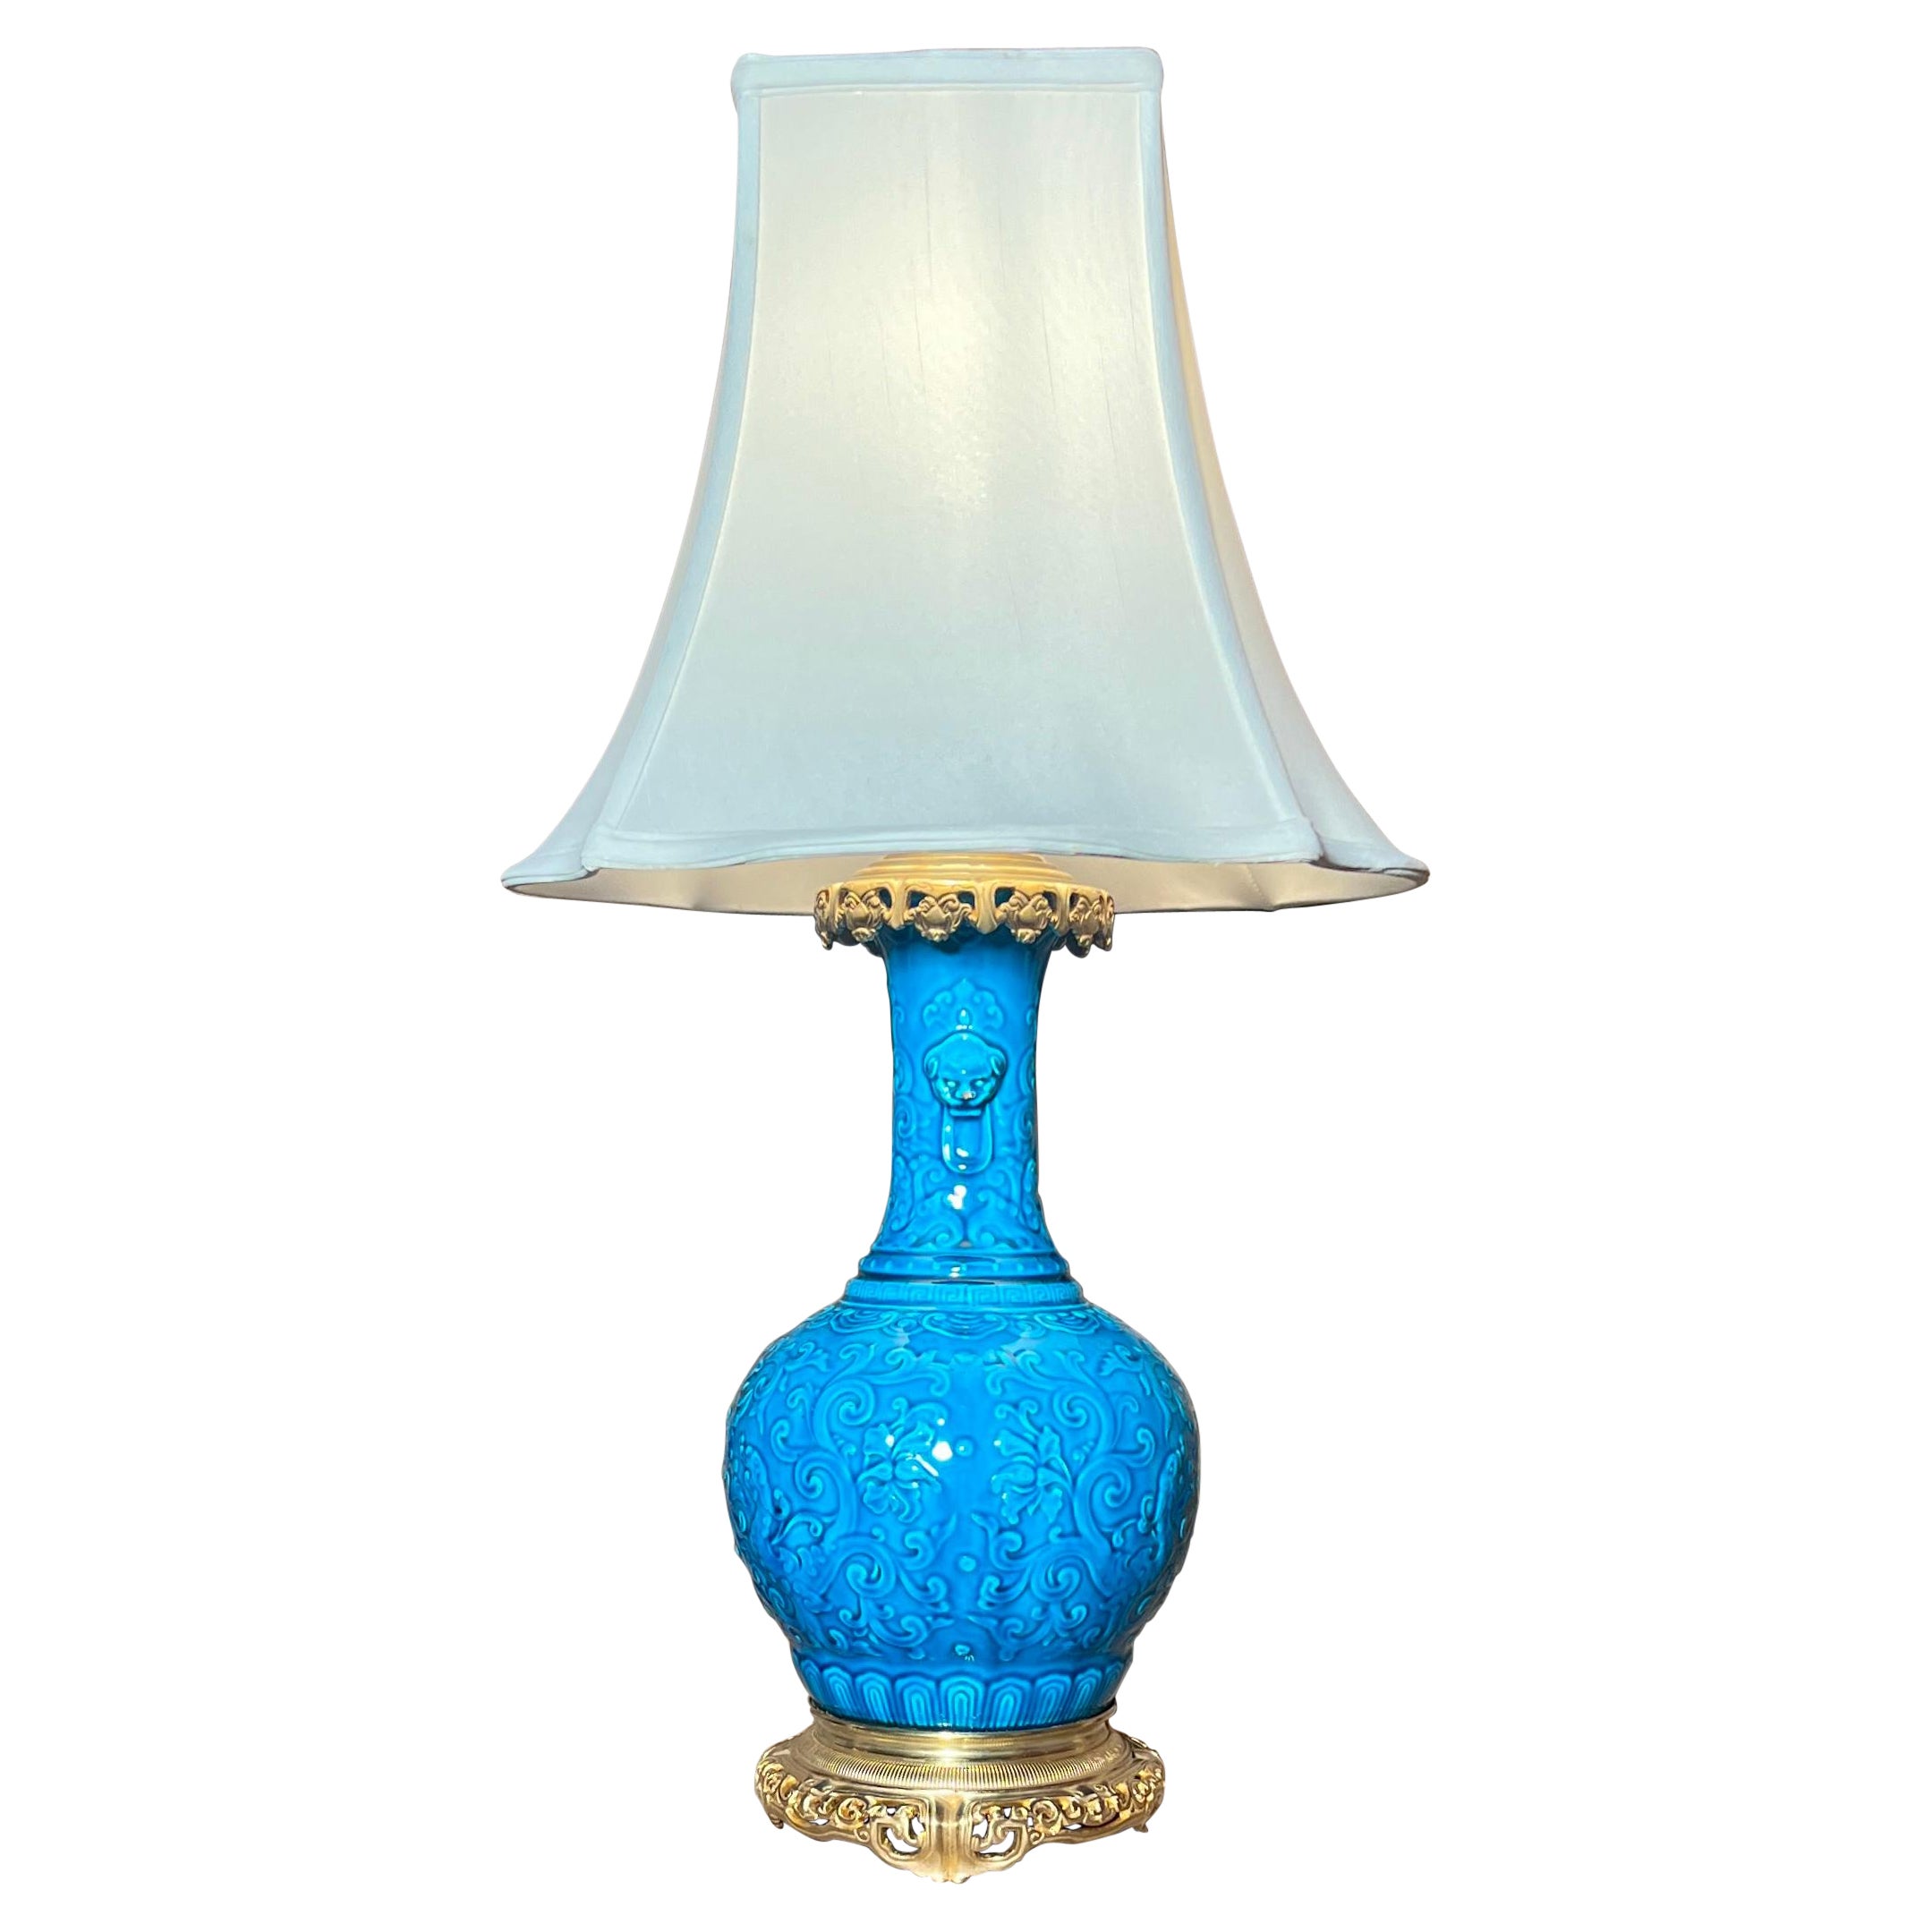 Antique French Blue Porcelain Lamp with Ormolu Mounts, Circa 1885-1890. For Sale